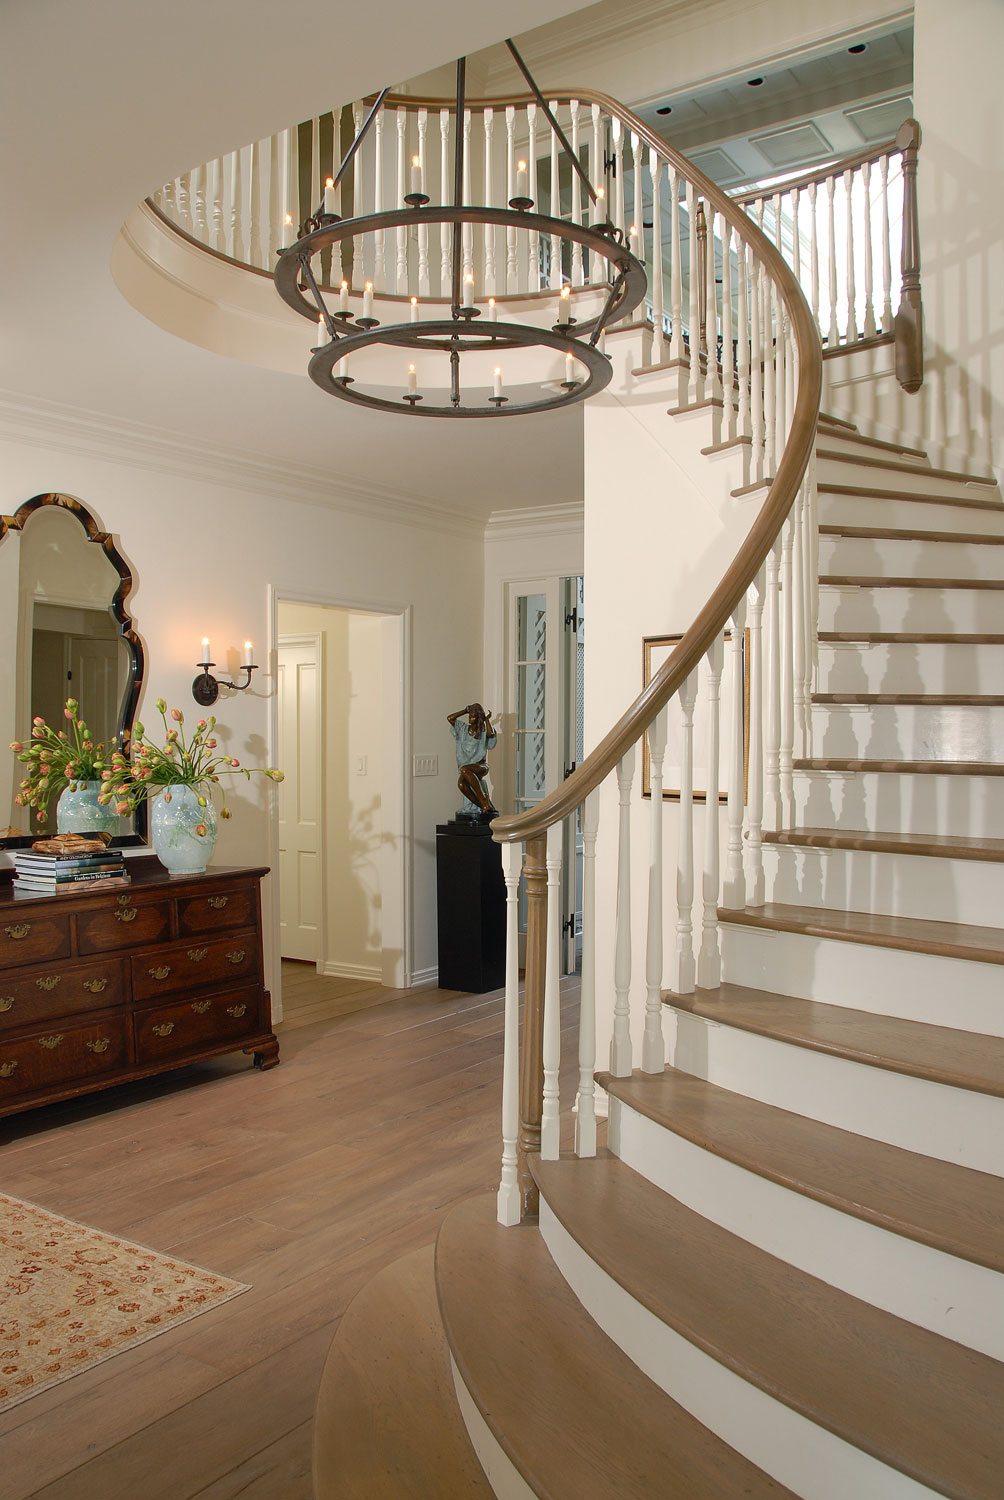 05-Z-traditional-staircase-curved-bannister-gary-drake-general-contractor.jpg